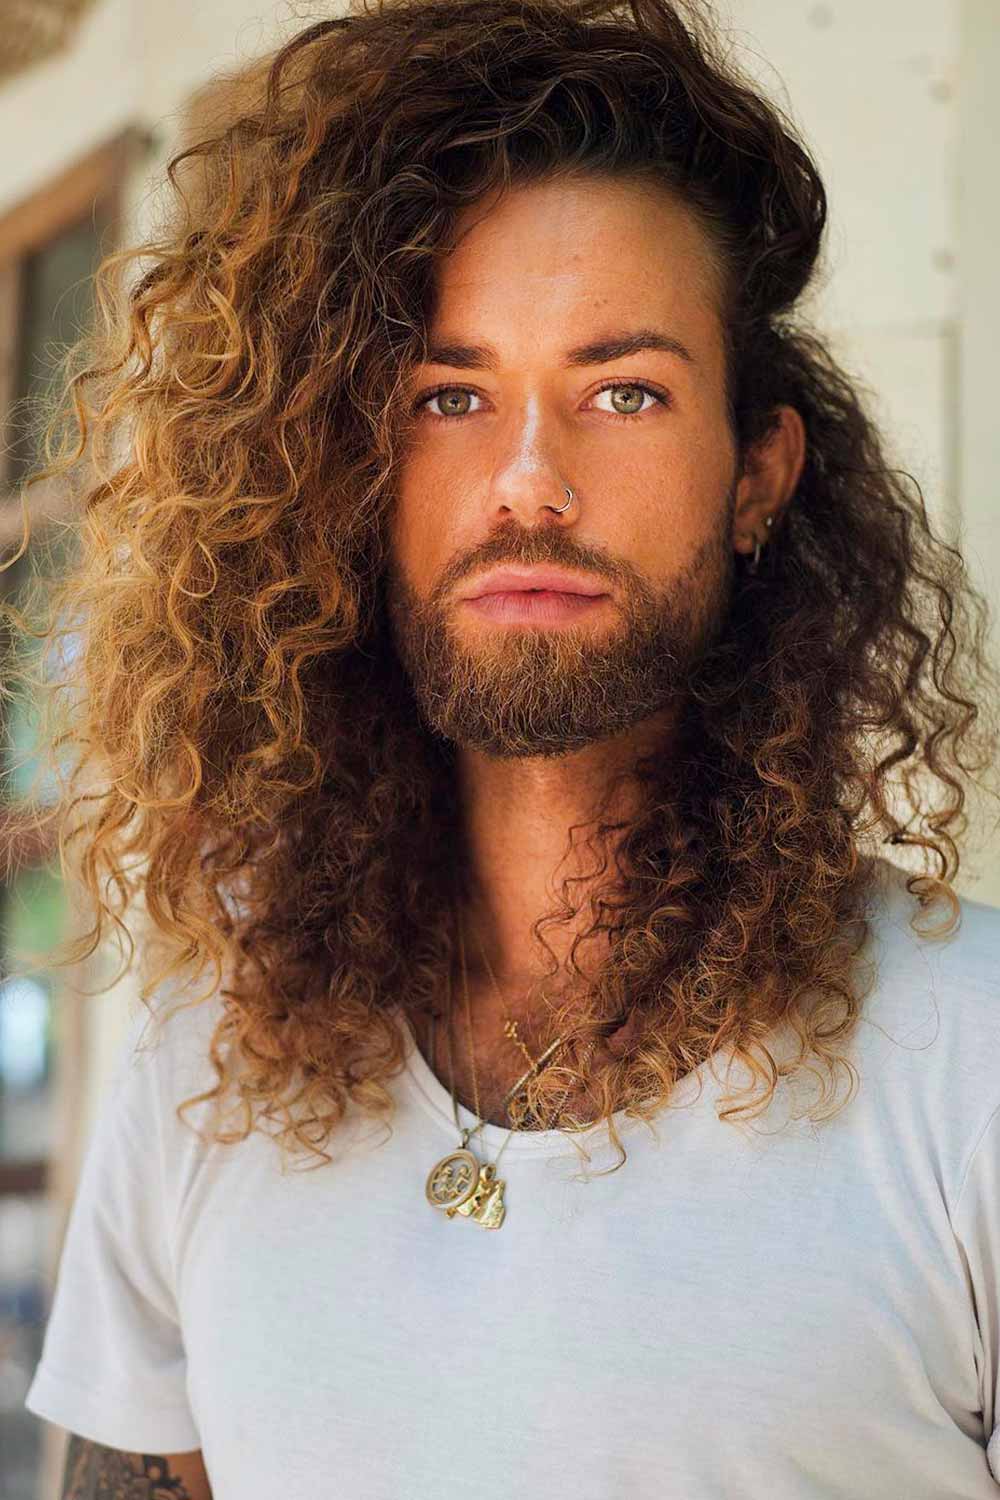 Jewfro Hairstyle Almanac For The High-End Hair Look | MensHaircuts.com